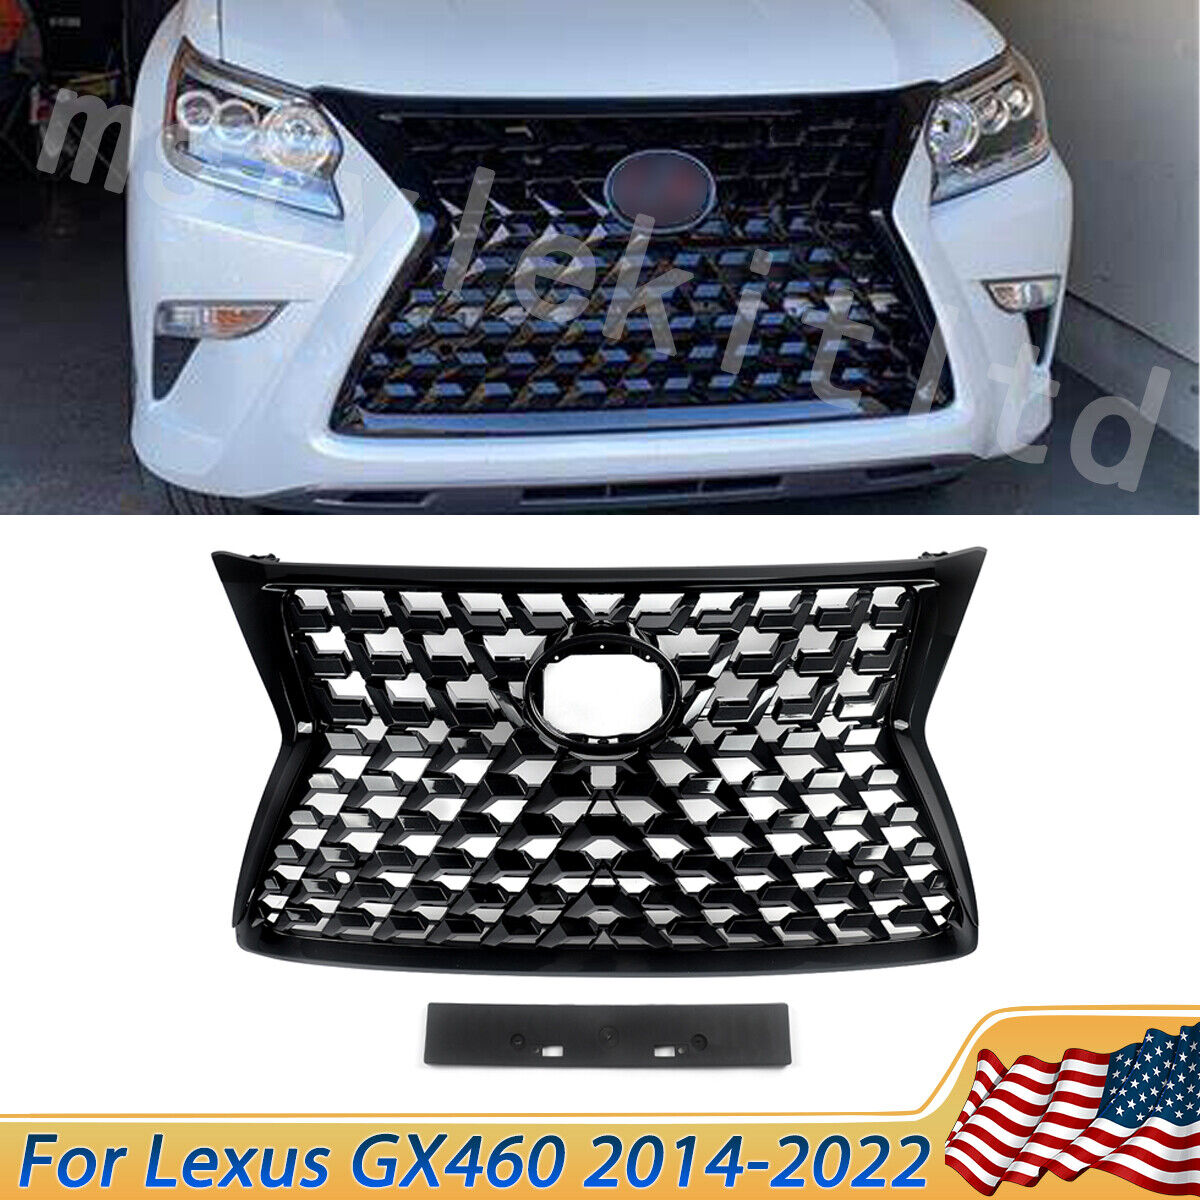 For 2014-2022 Lexus GX460 Front Upper Grille Gloss Black New Style Luxury Grill